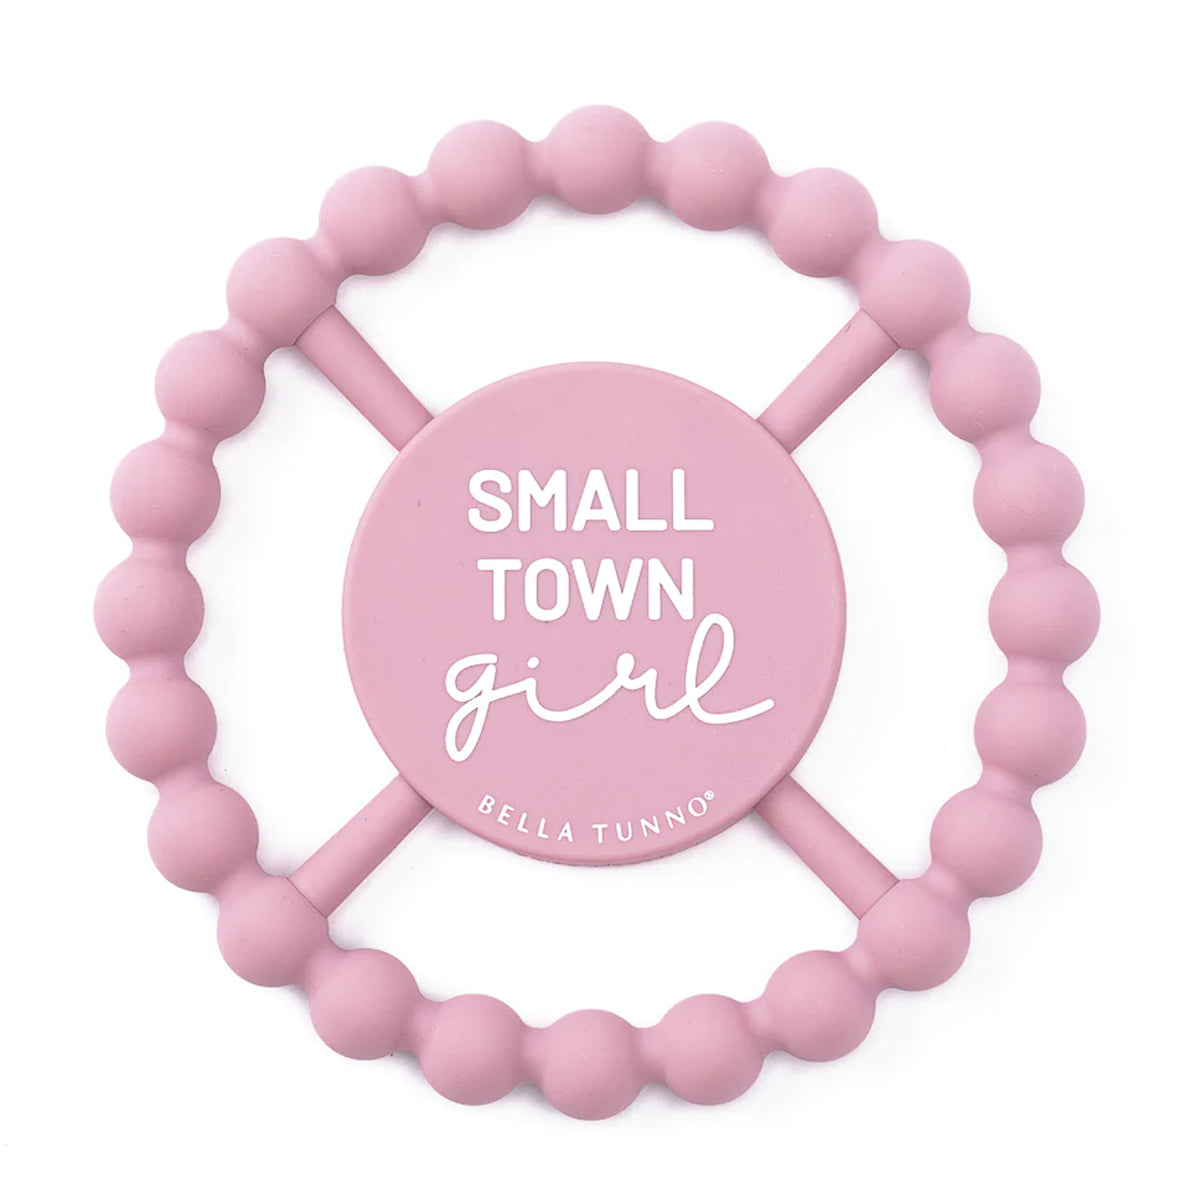 Bella Tunno Small Town Girl Happy Teether Teething Ring